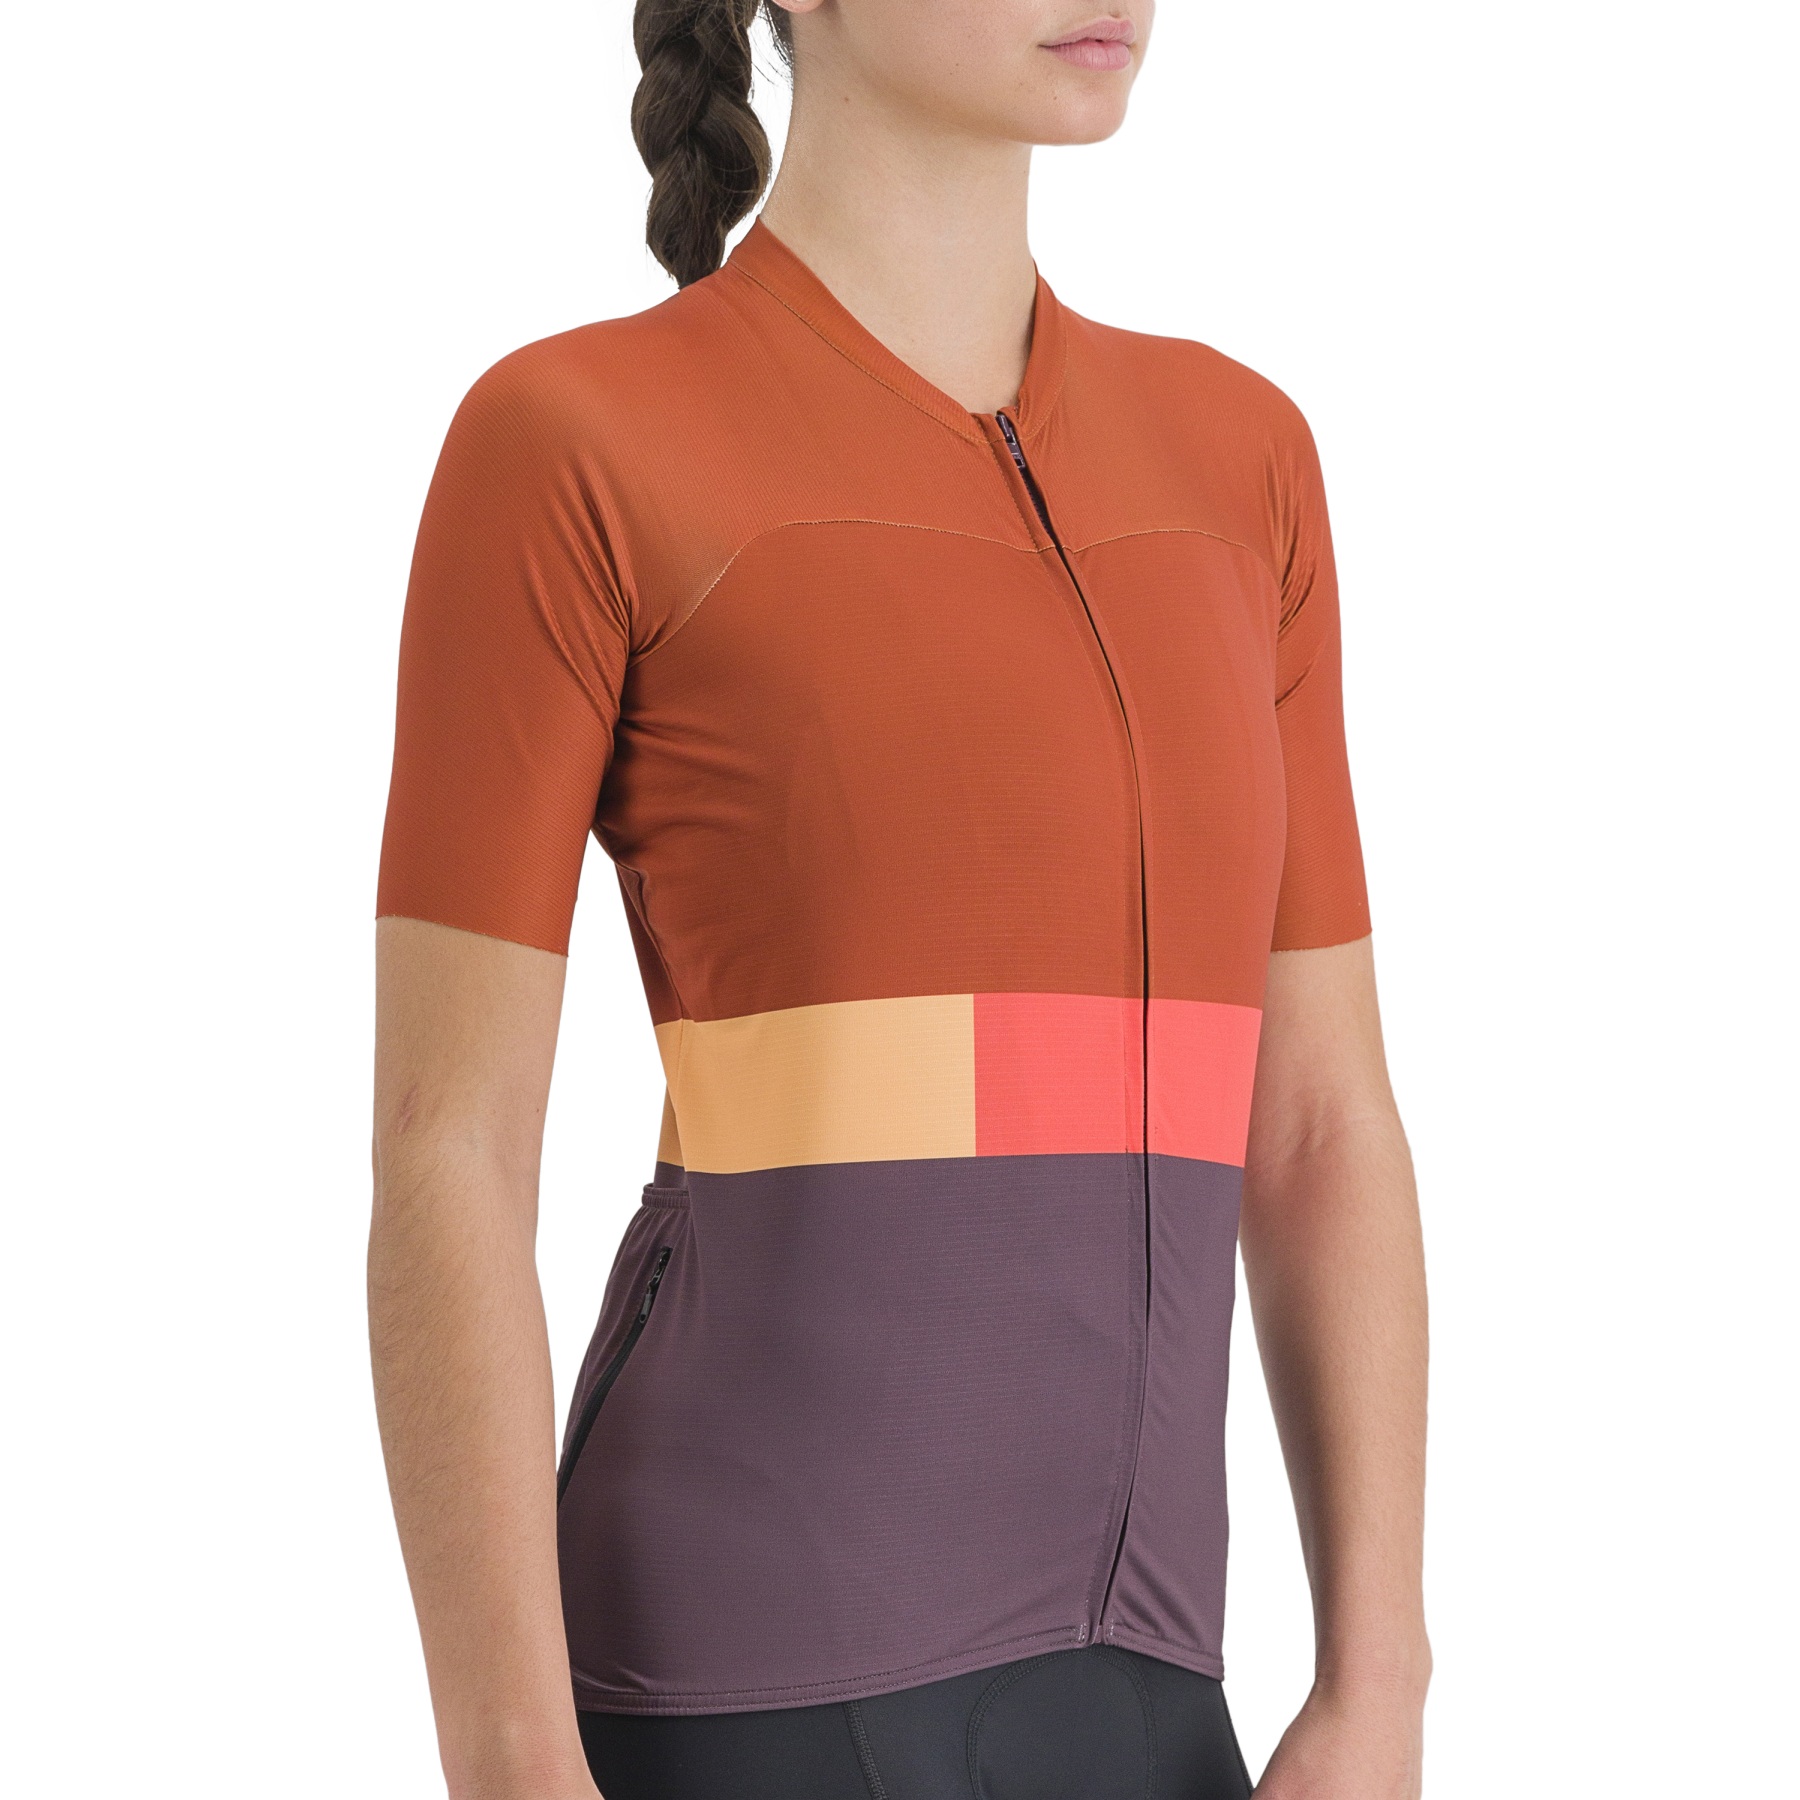 Picture of Sportful Snap Women Bike Jersey - 623 Huckleberry Cayenna Red